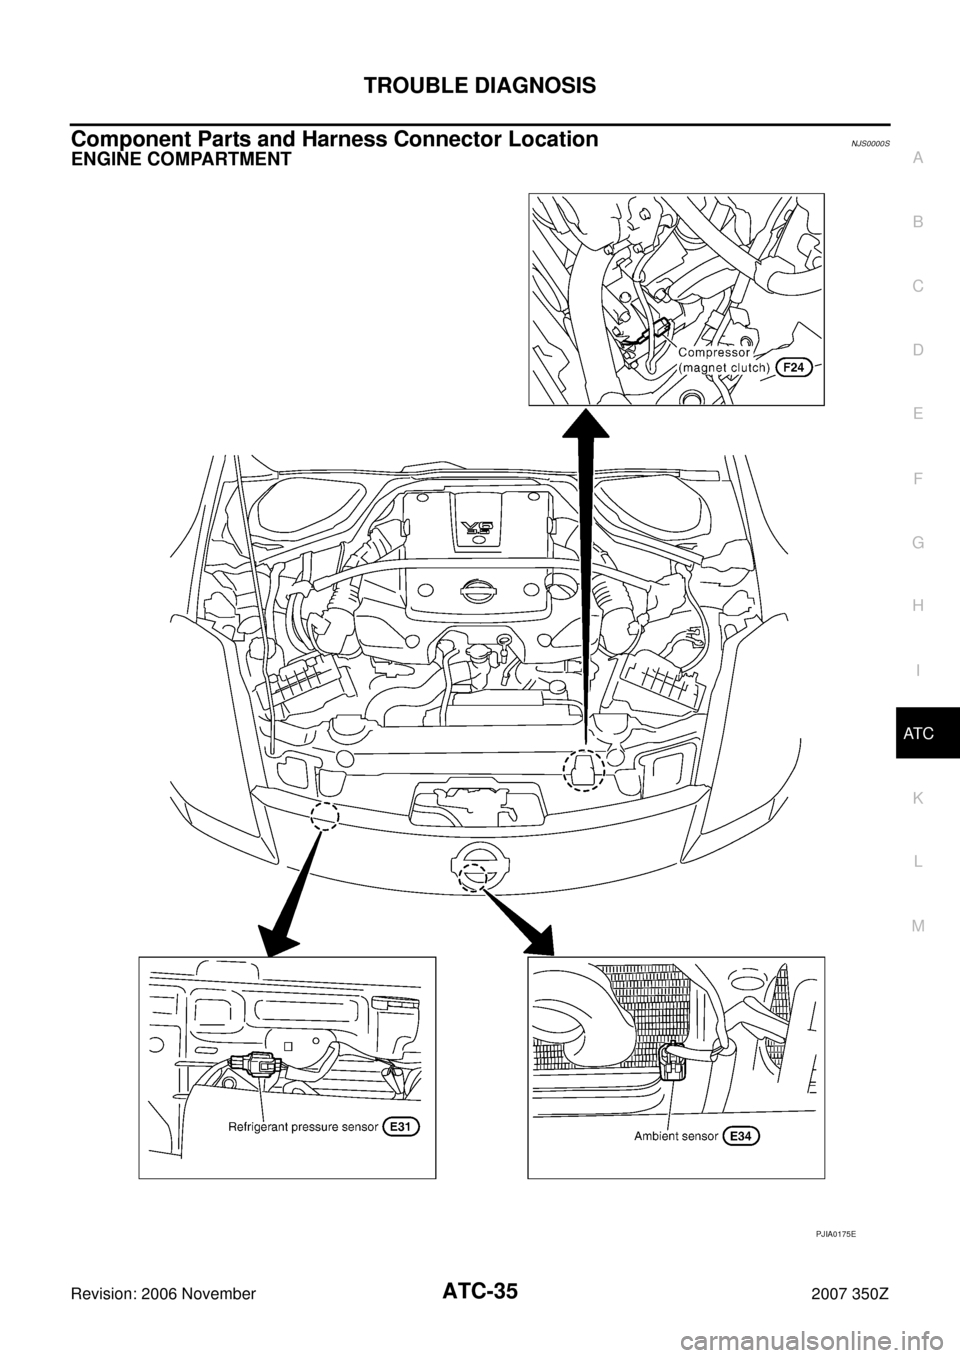 NISSAN 350Z 2007 Z33 Automatic Air Conditioner Workshop Manual TROUBLE DIAGNOSIS
ATC-35
C
D
E
F
G
H
I
K
L
MA
B
AT C
Revision: 2006 November2007 350Z
Component Parts and Harness Connector LocationNJS0000S
ENGINE COMPARTMENT
PJIA0175E 